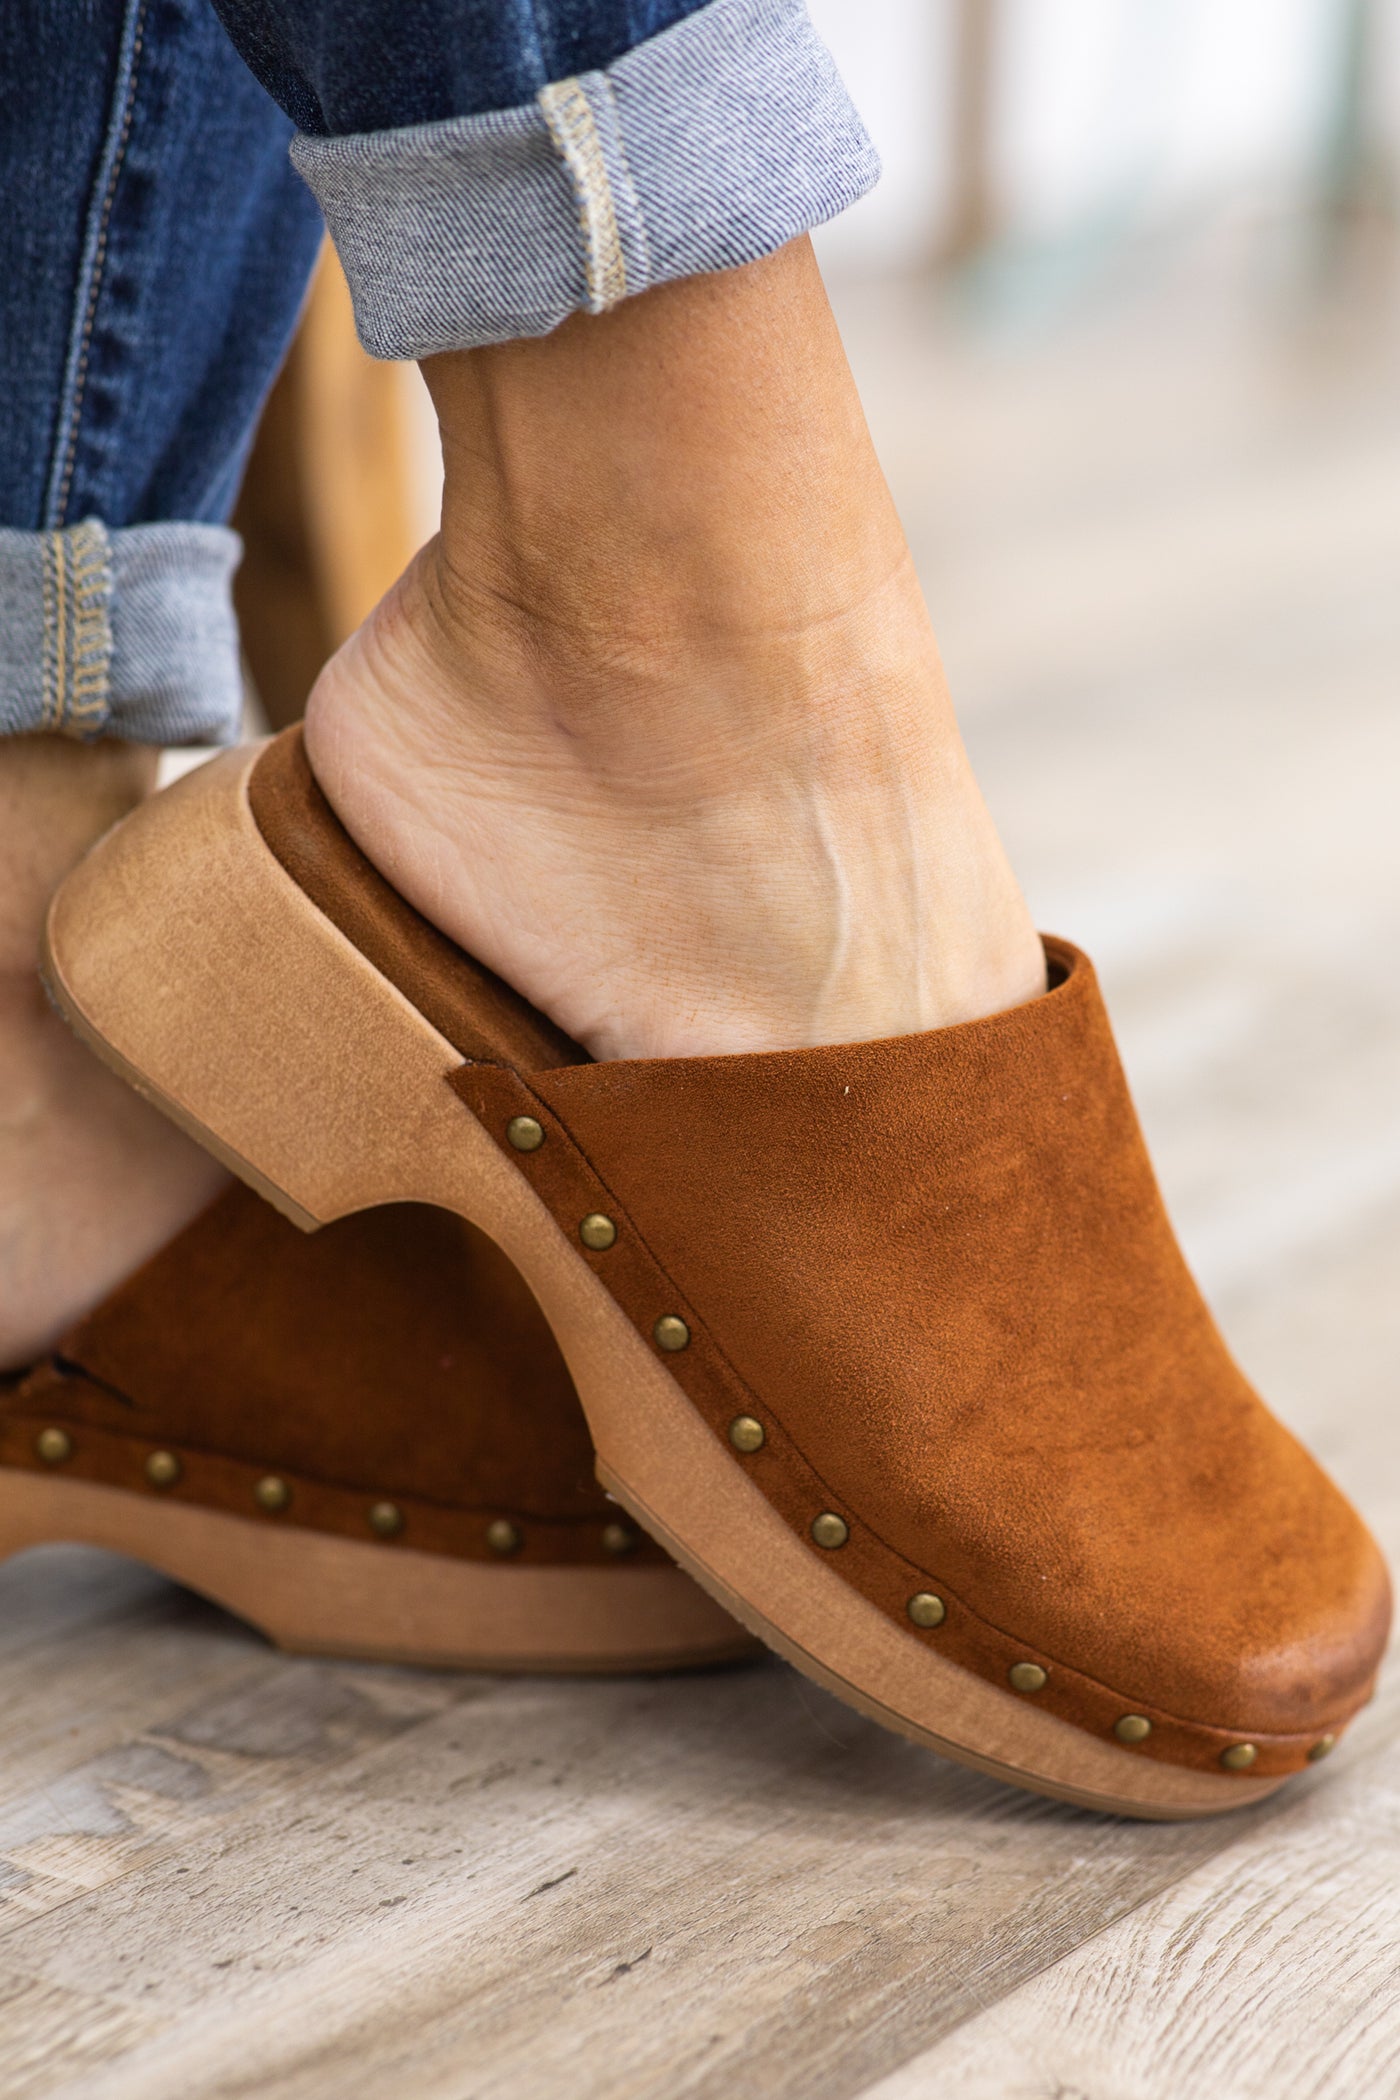 Cognac Closed Toe Clogs With Stud Detail